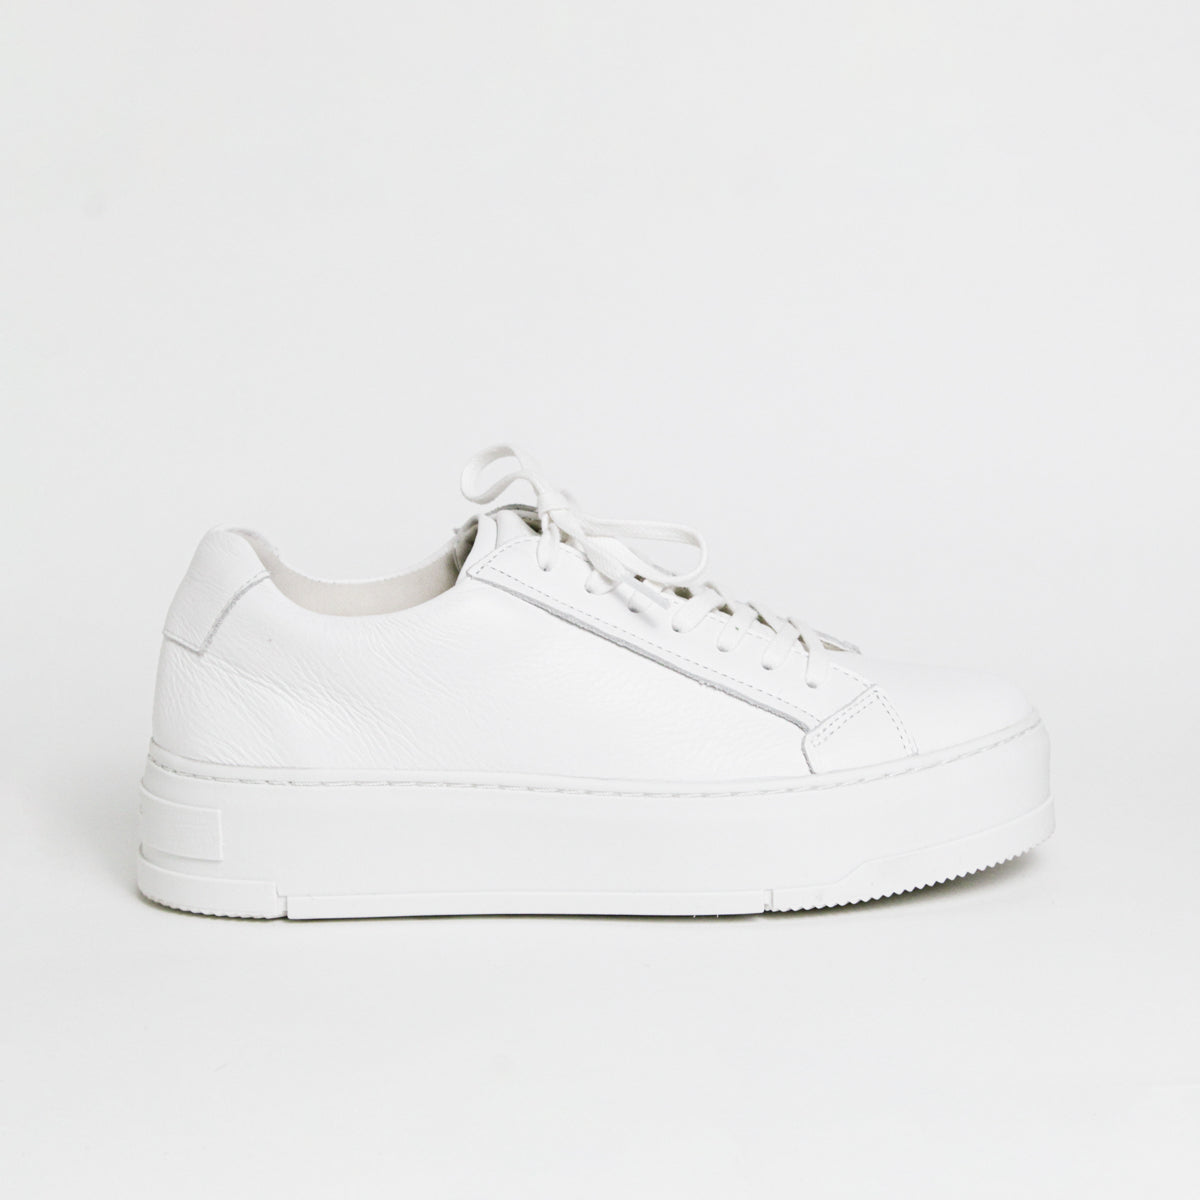 Off-white Perforated Nubuck Sneakers for Men